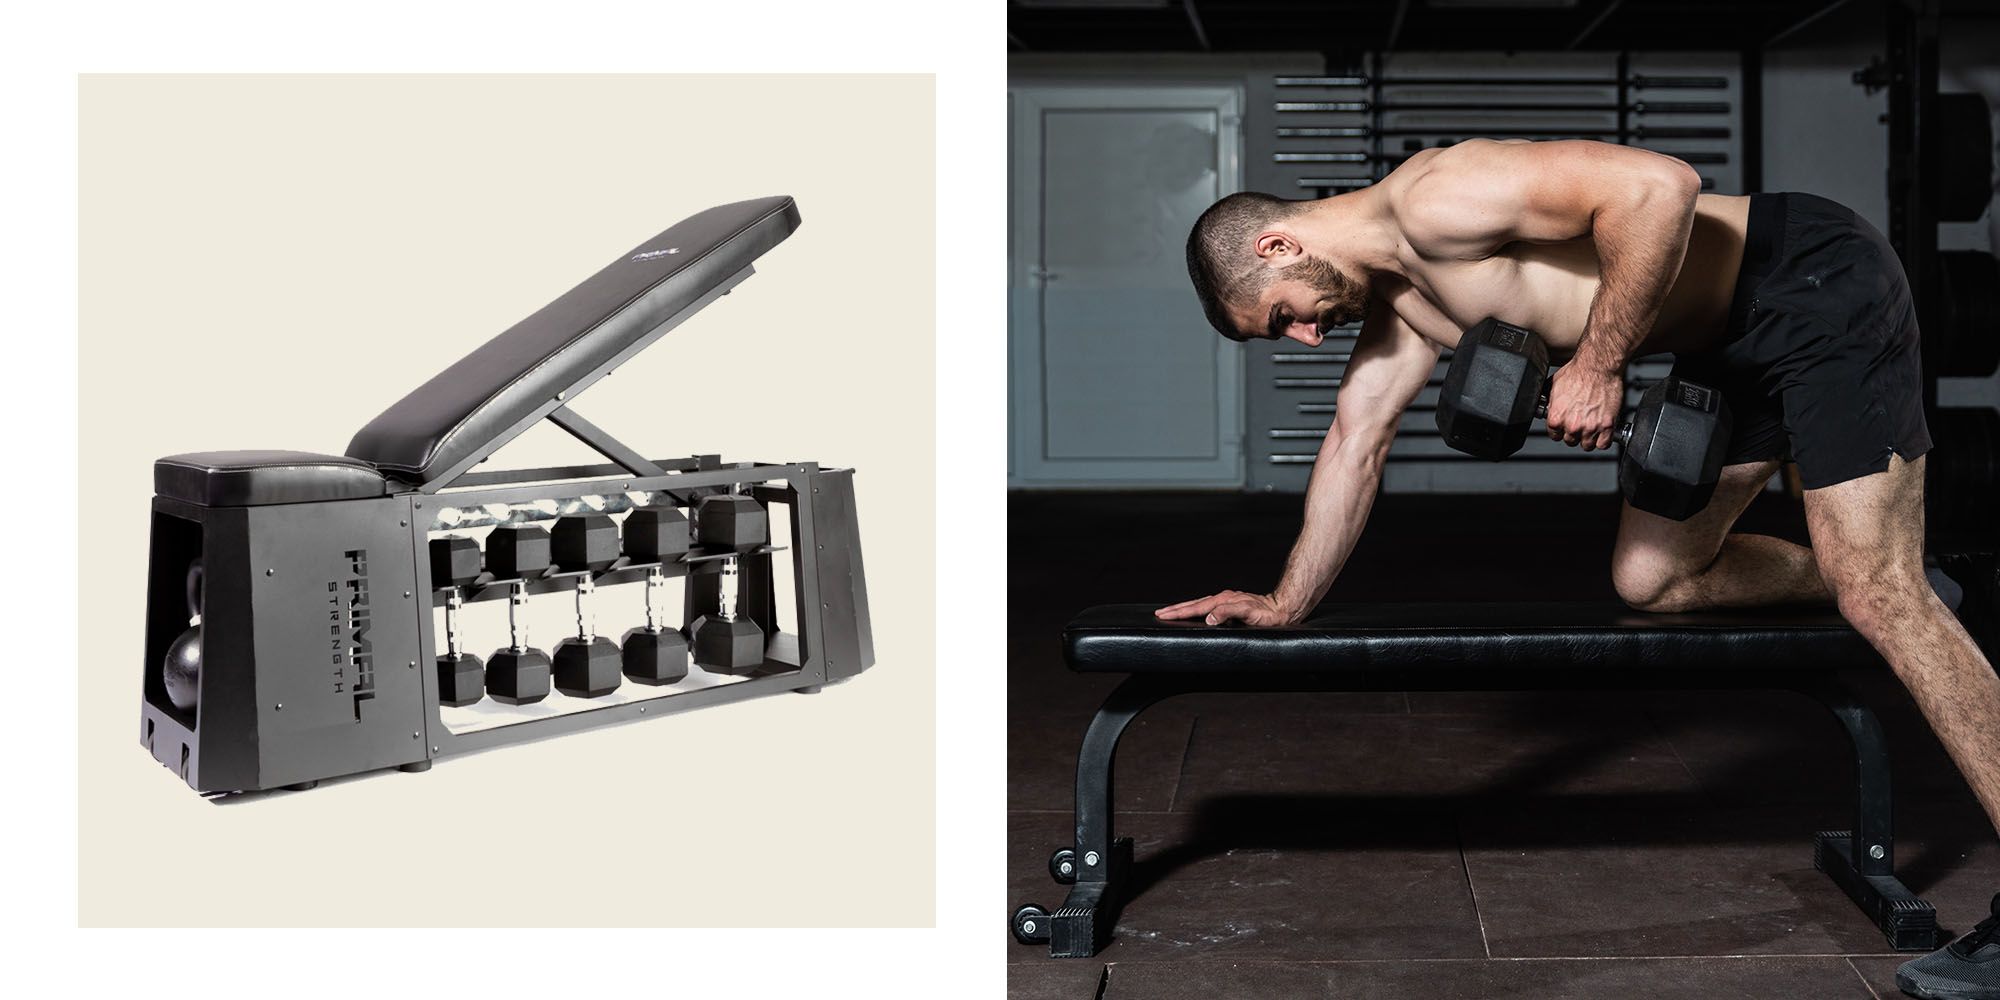 How to buy a weight lifting bench for a home gym - Reviewed